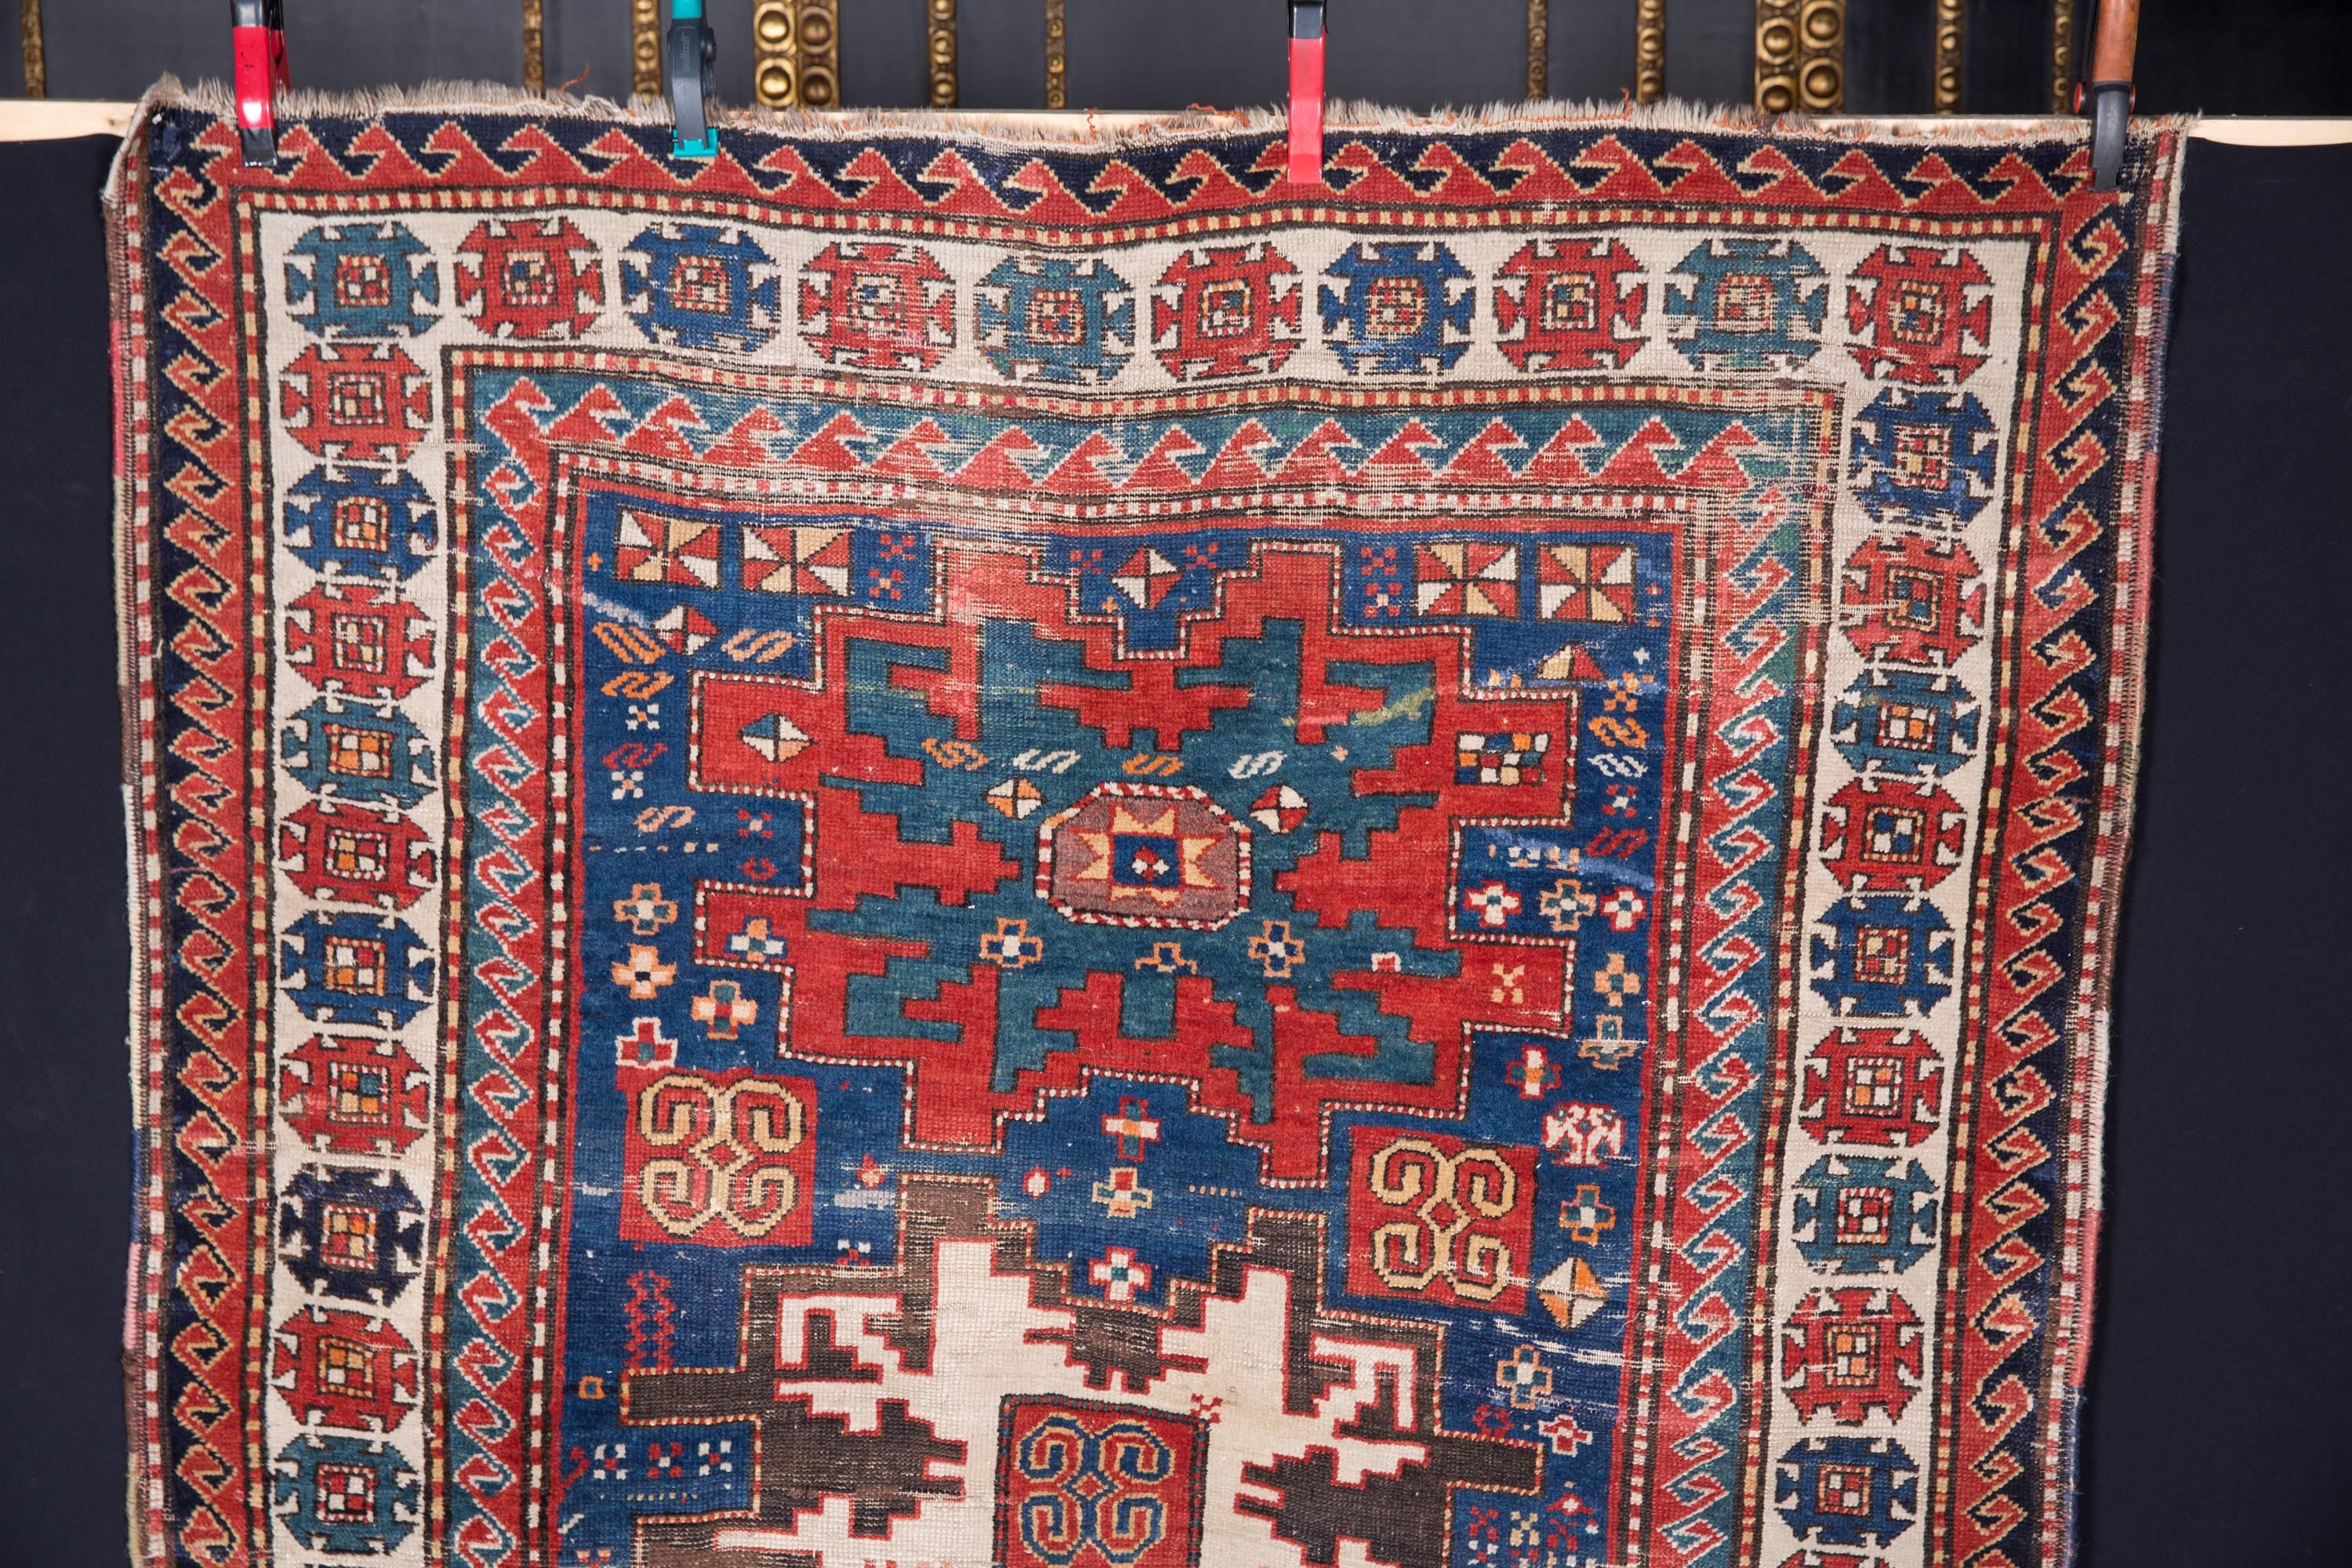 Beautiful rare Kazak Lesghi rug. From Berlin villa resolution.

Please take a look at the detailed pictures.